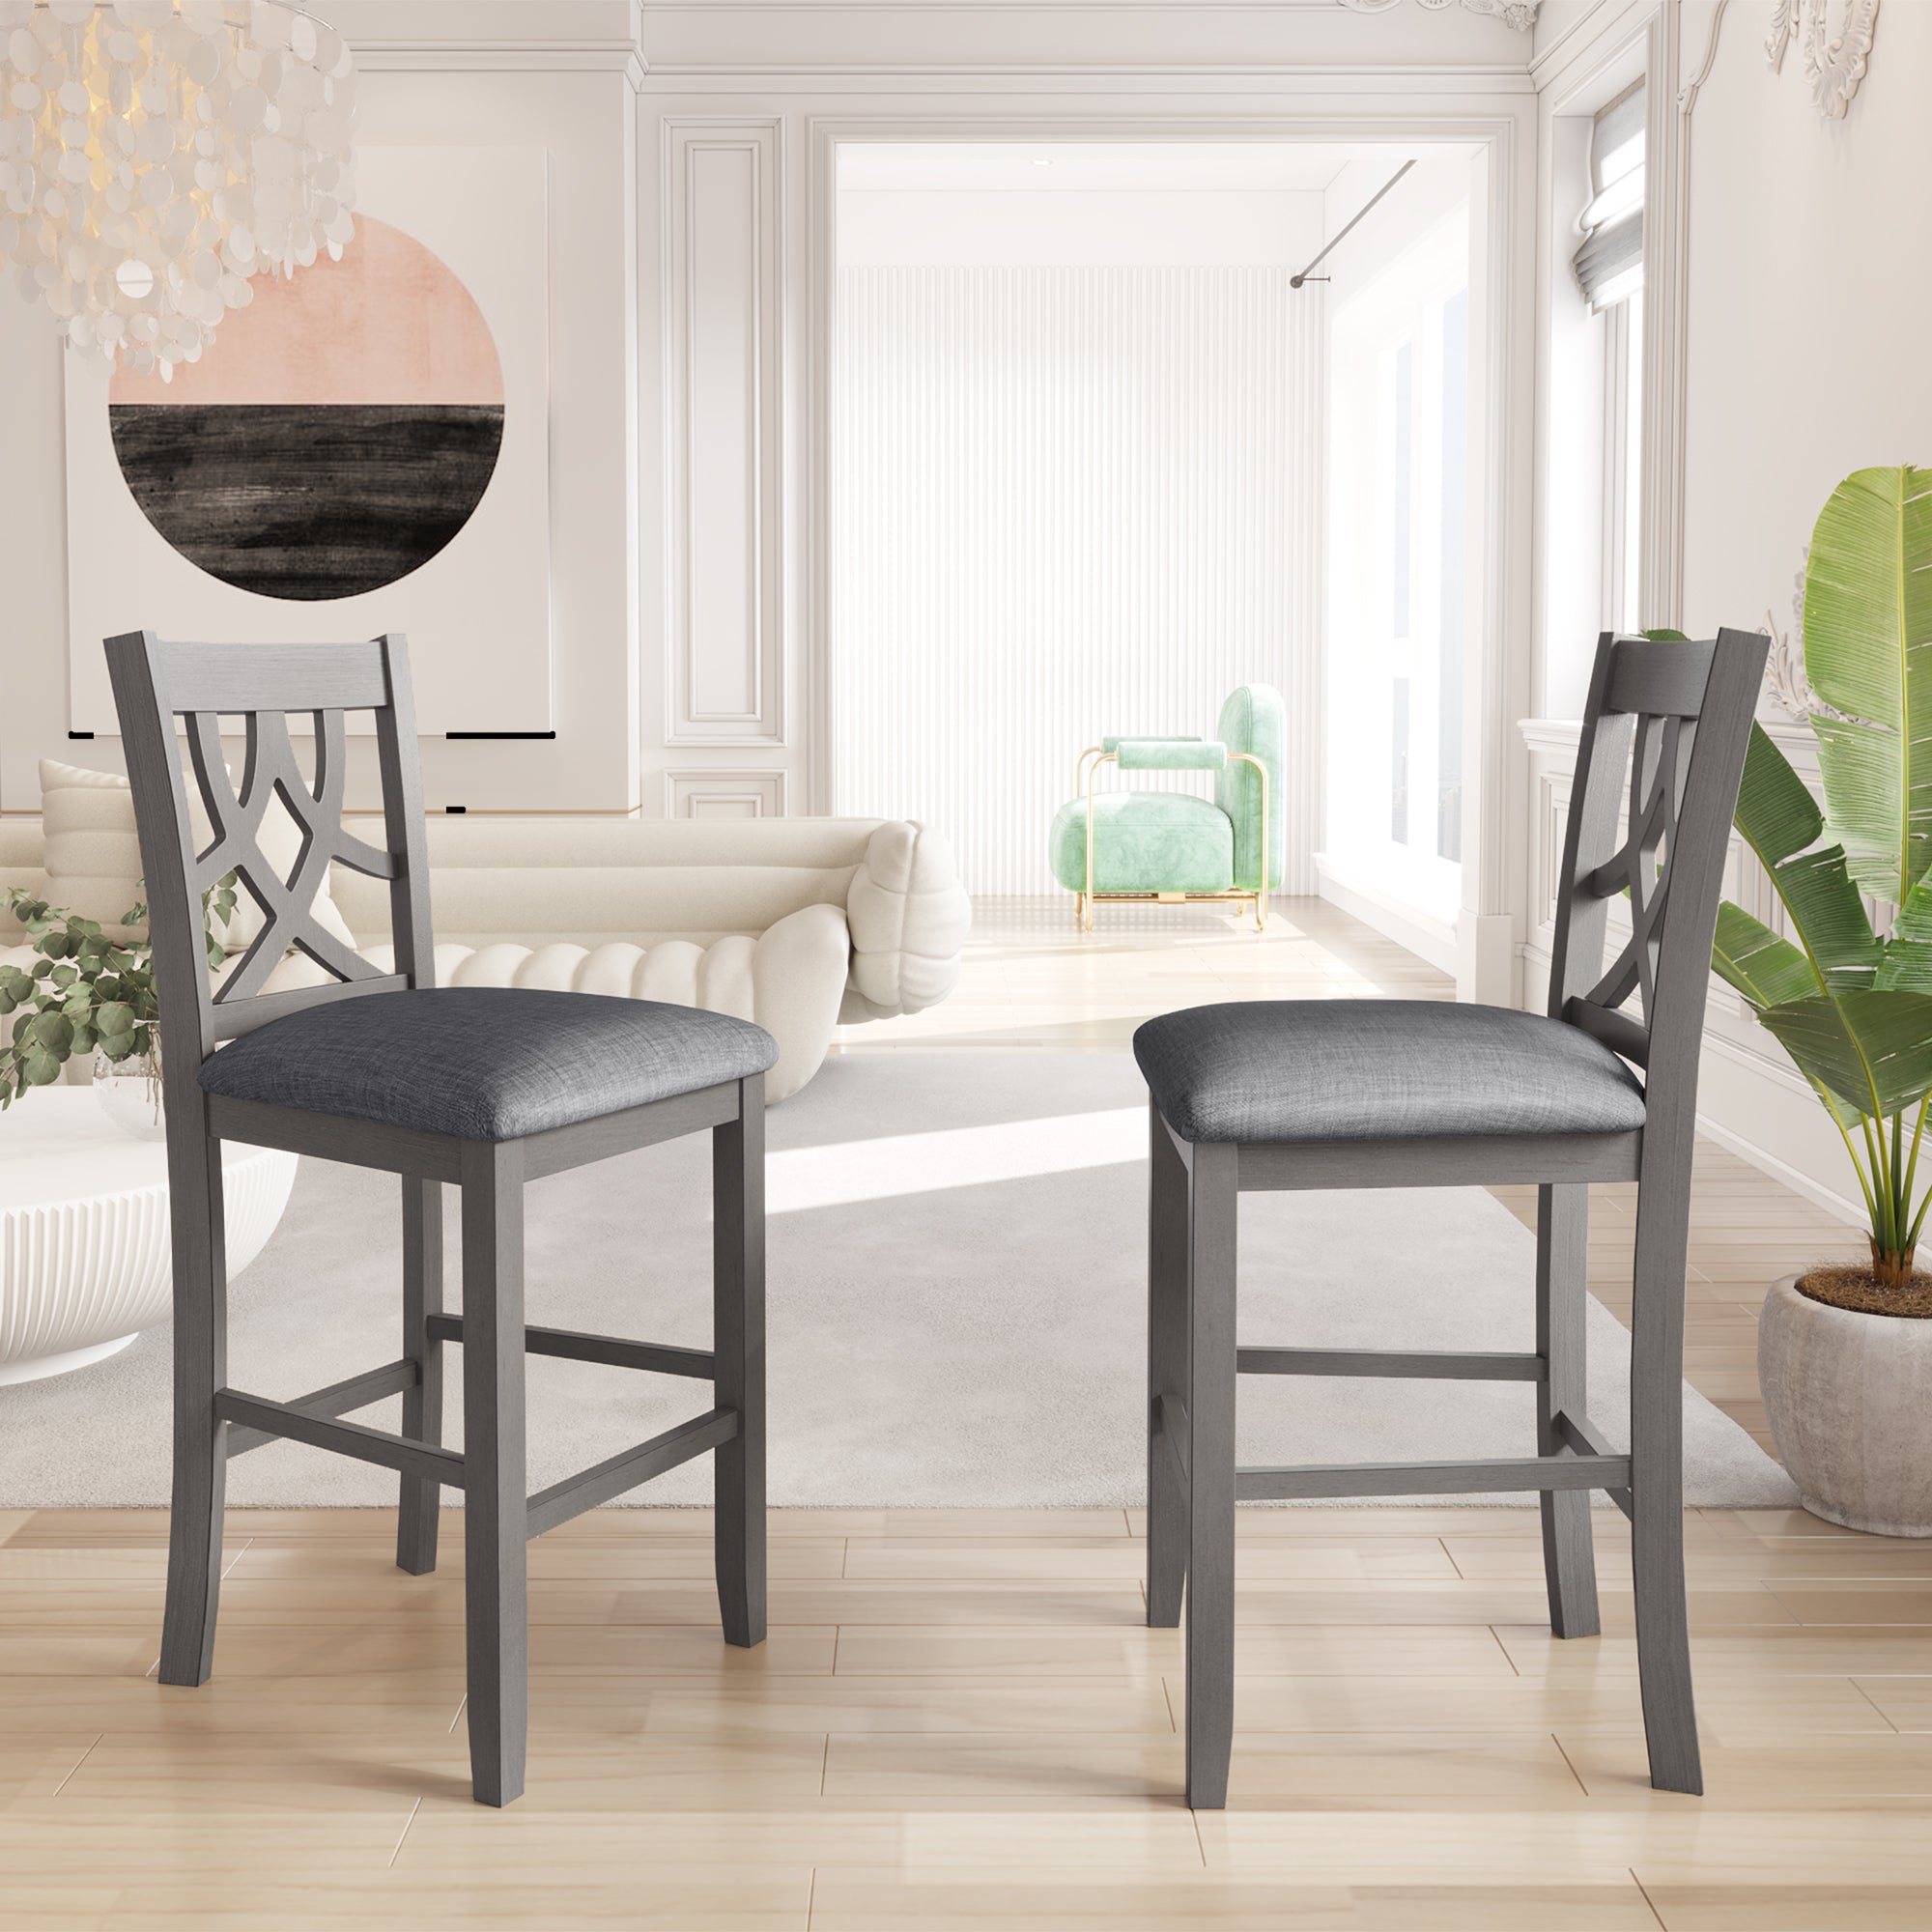 Set of 2 Pieces Gray Solid Wood Counter Height Stools 